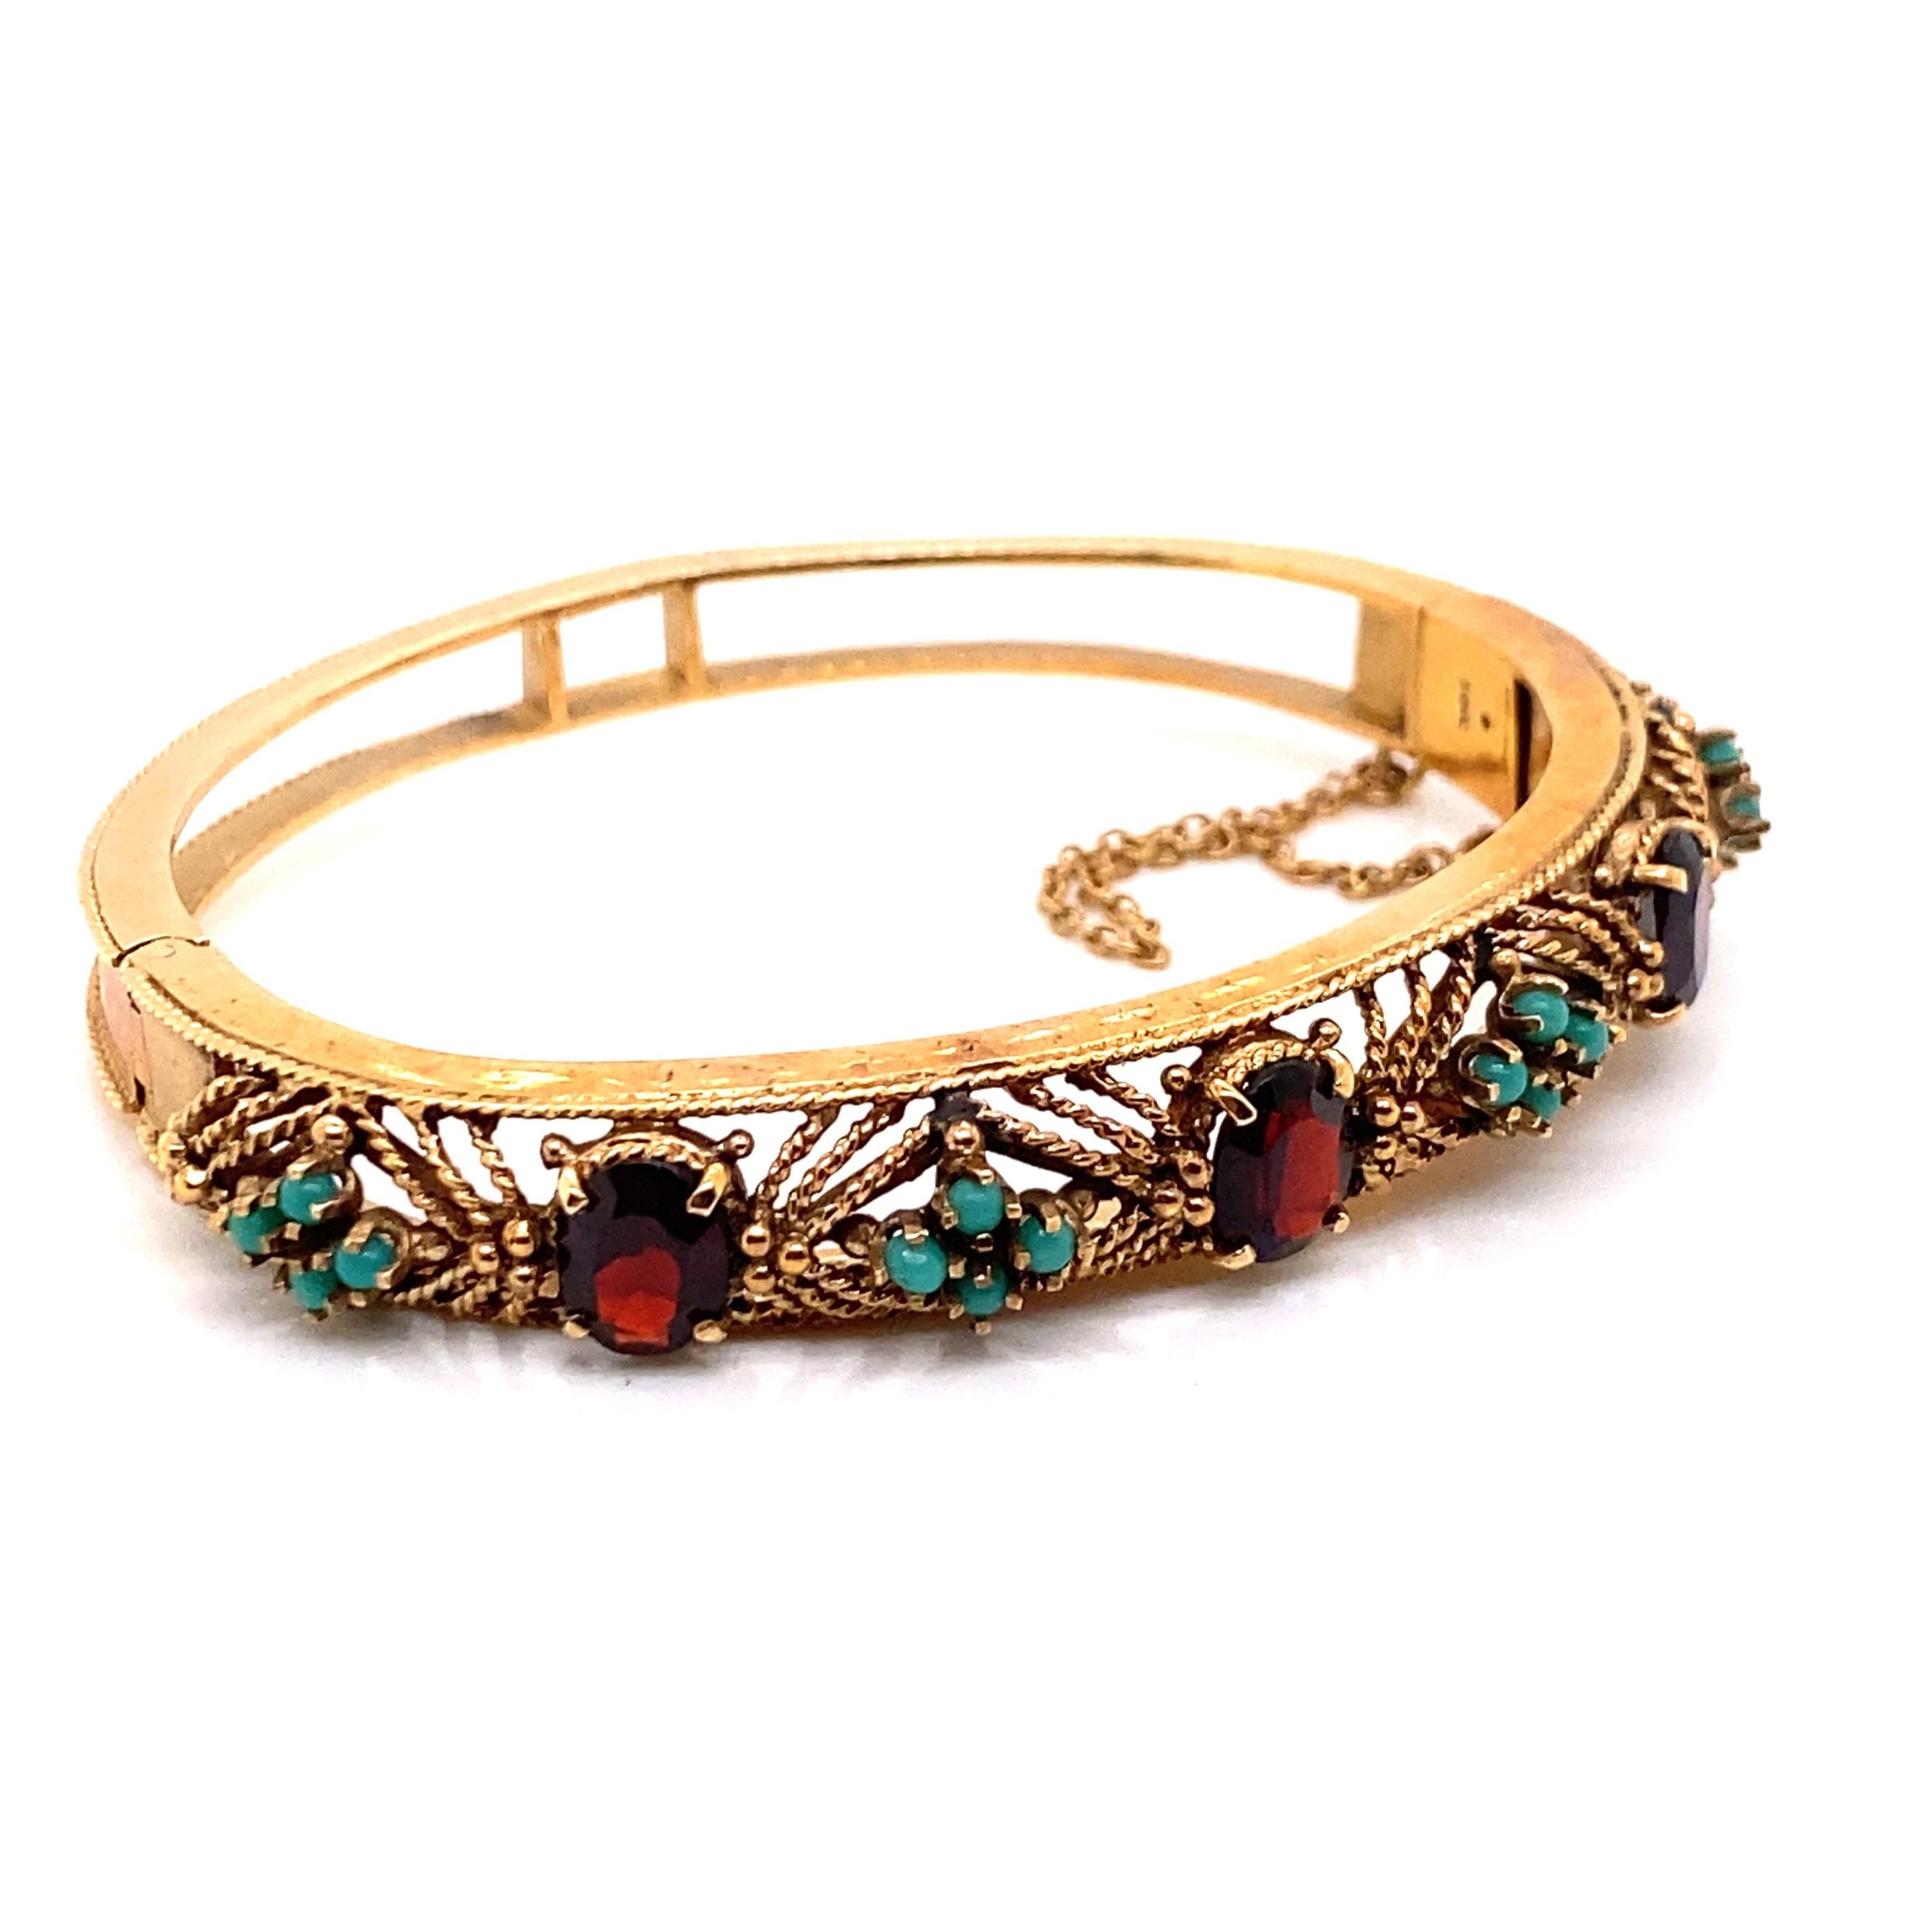 Retro Vintage 1960's 14K Yellow Gold Bangle Bracelet with Garnet and Turquoise For Sale